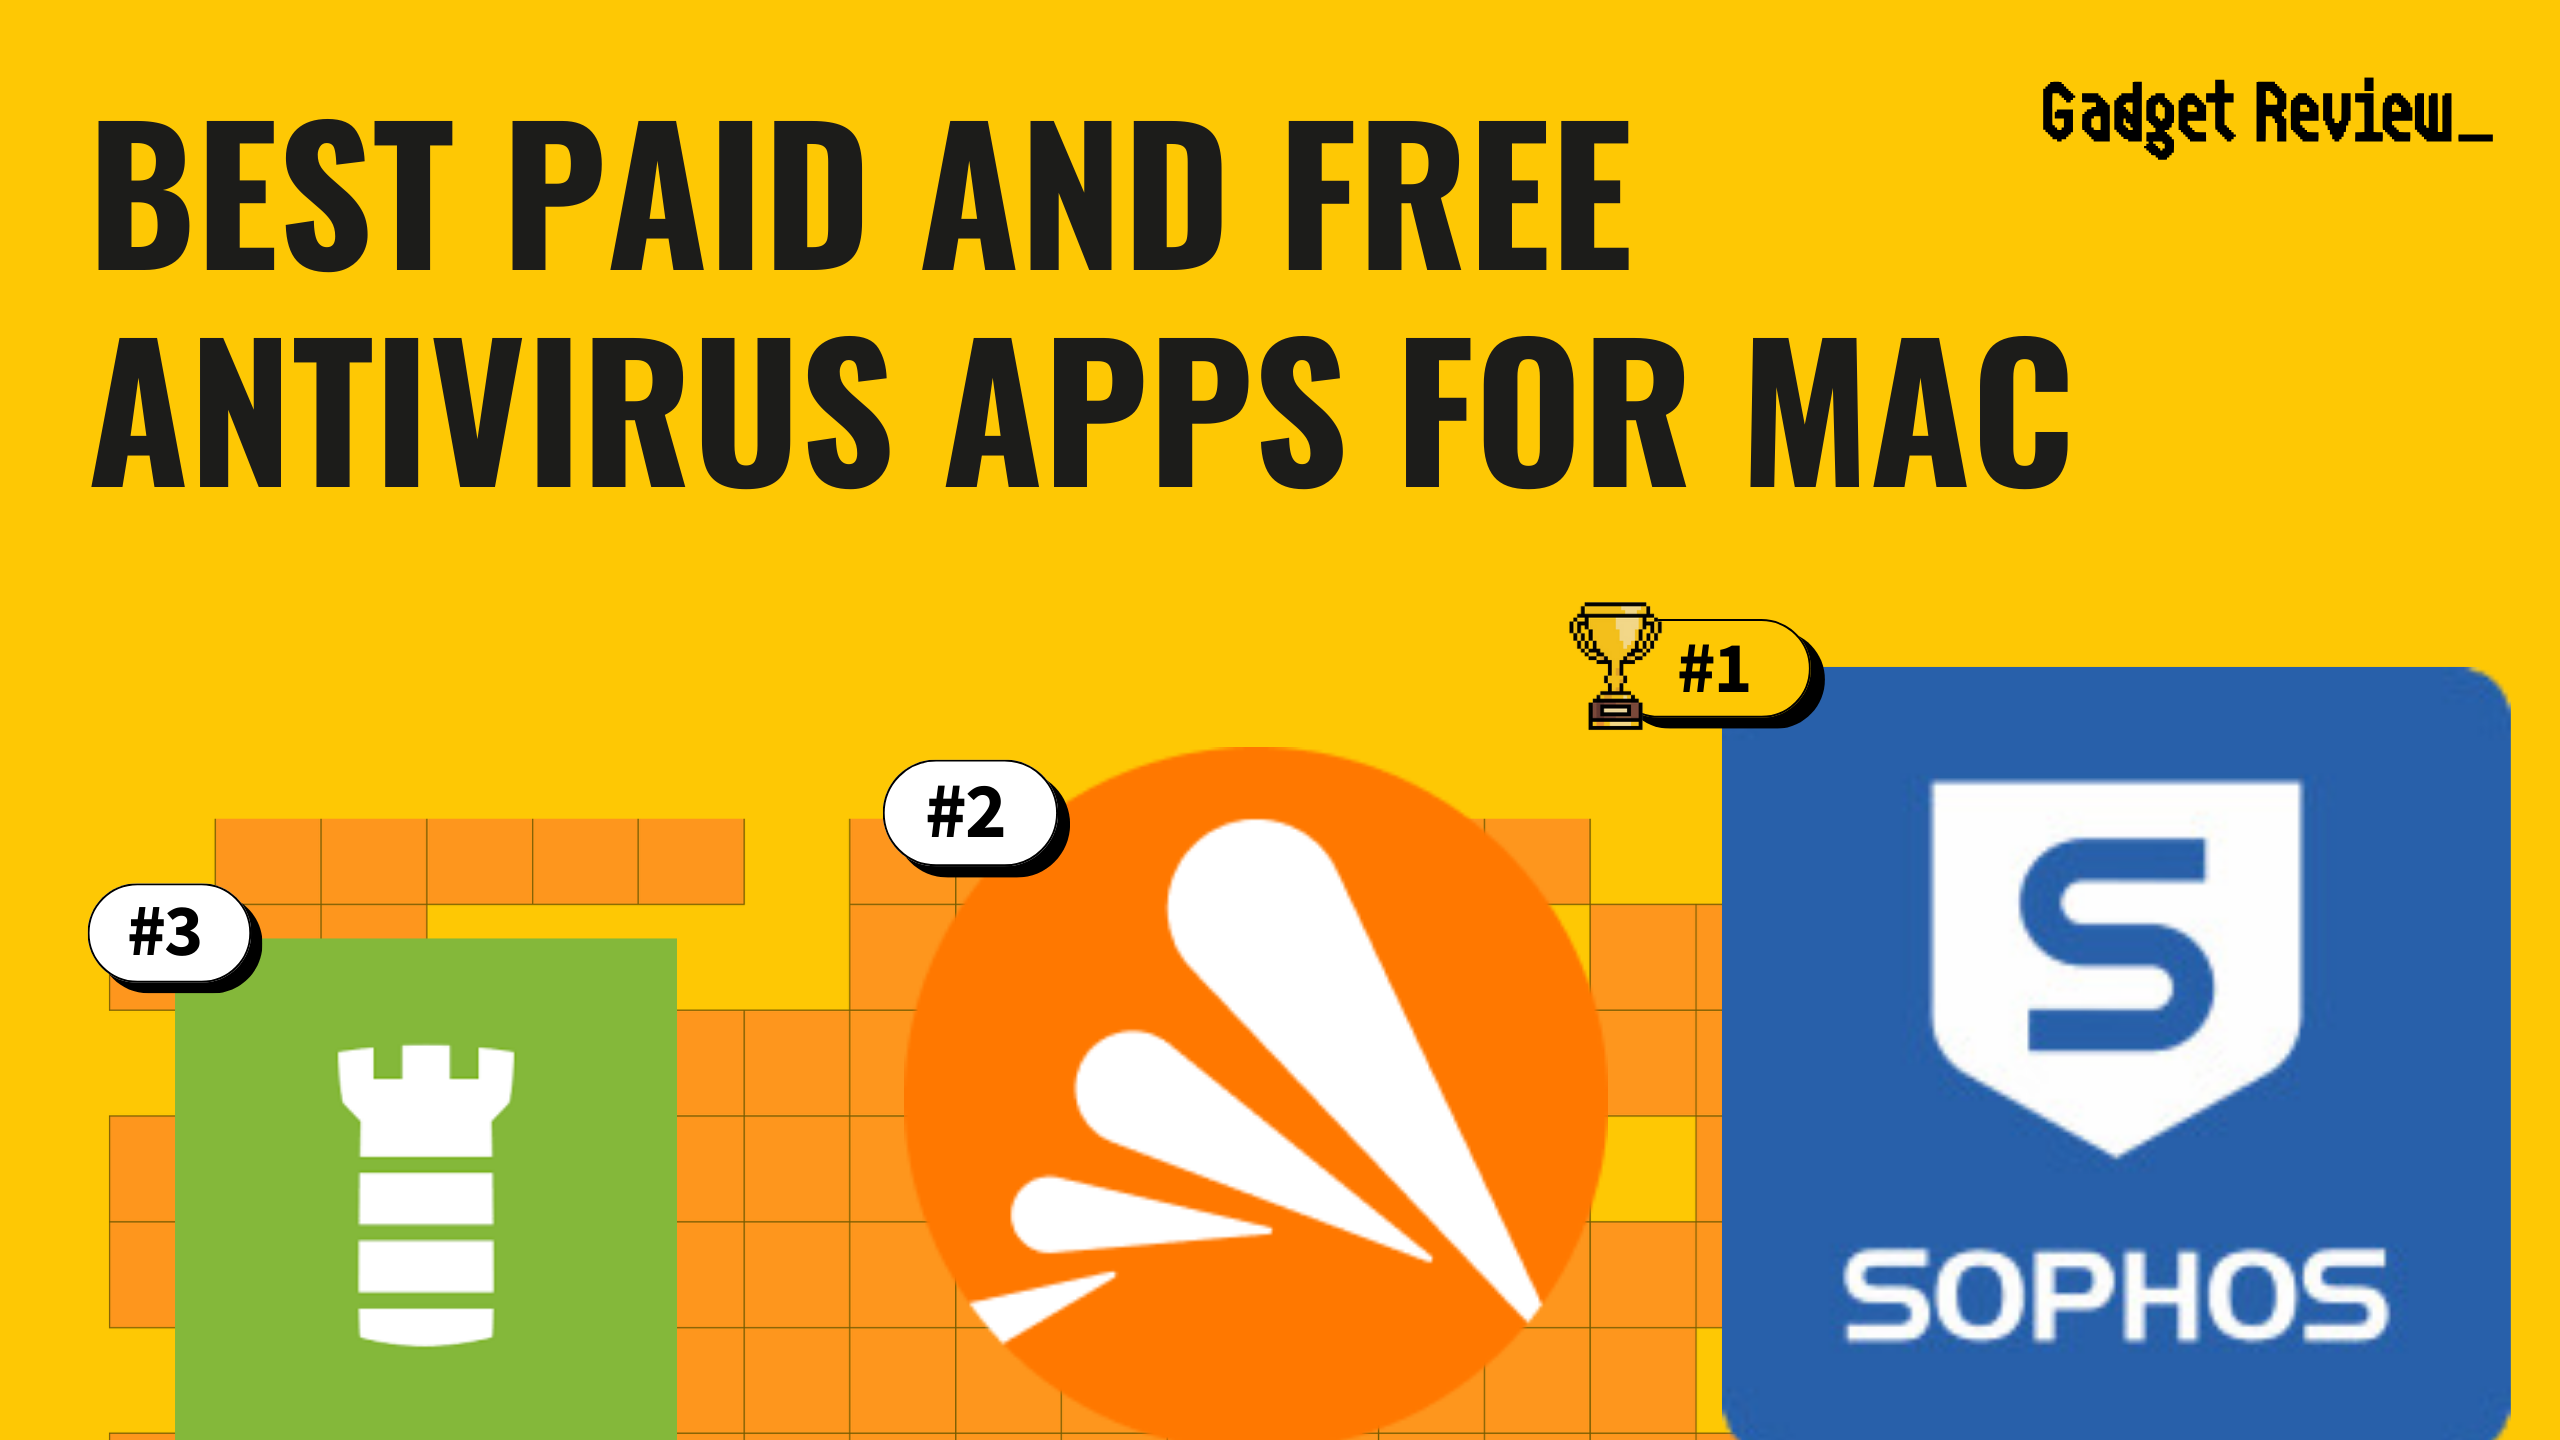 6 of the Best Paid and Free Antivirus Apps for Mac